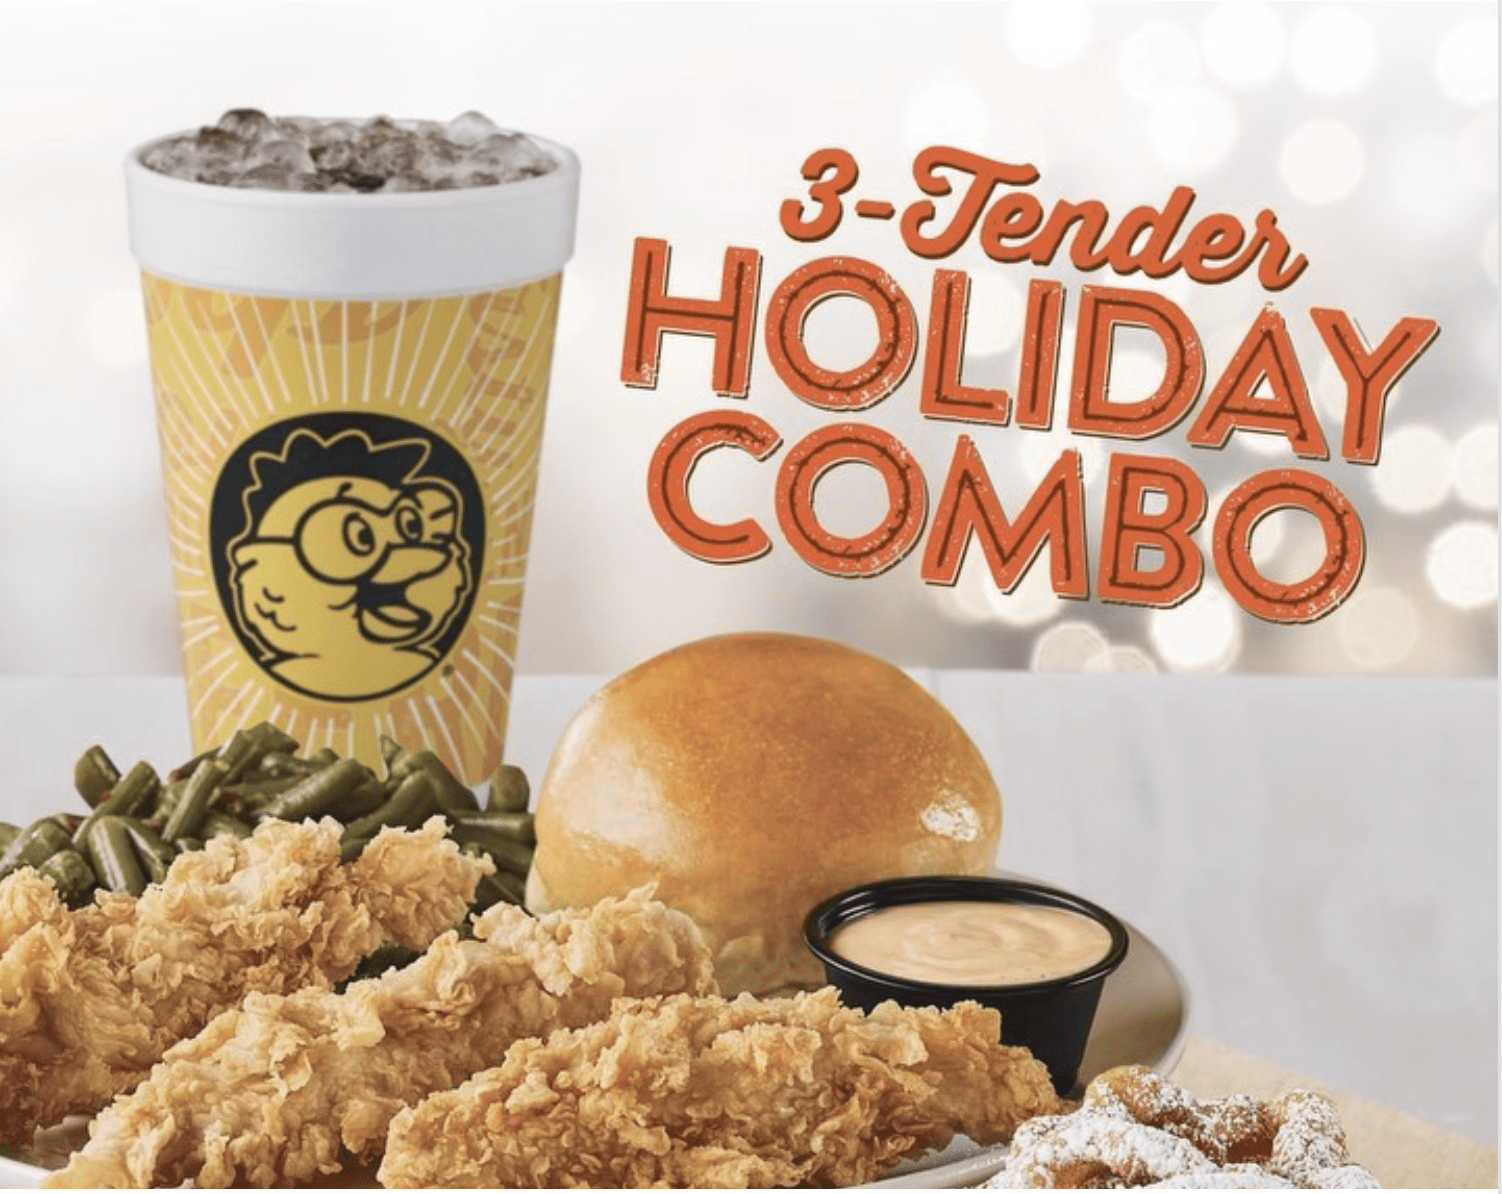 AWESOME HOLIDAY SPECIALS & HOLIDAY HOURS AT GOLDEN CHICK!